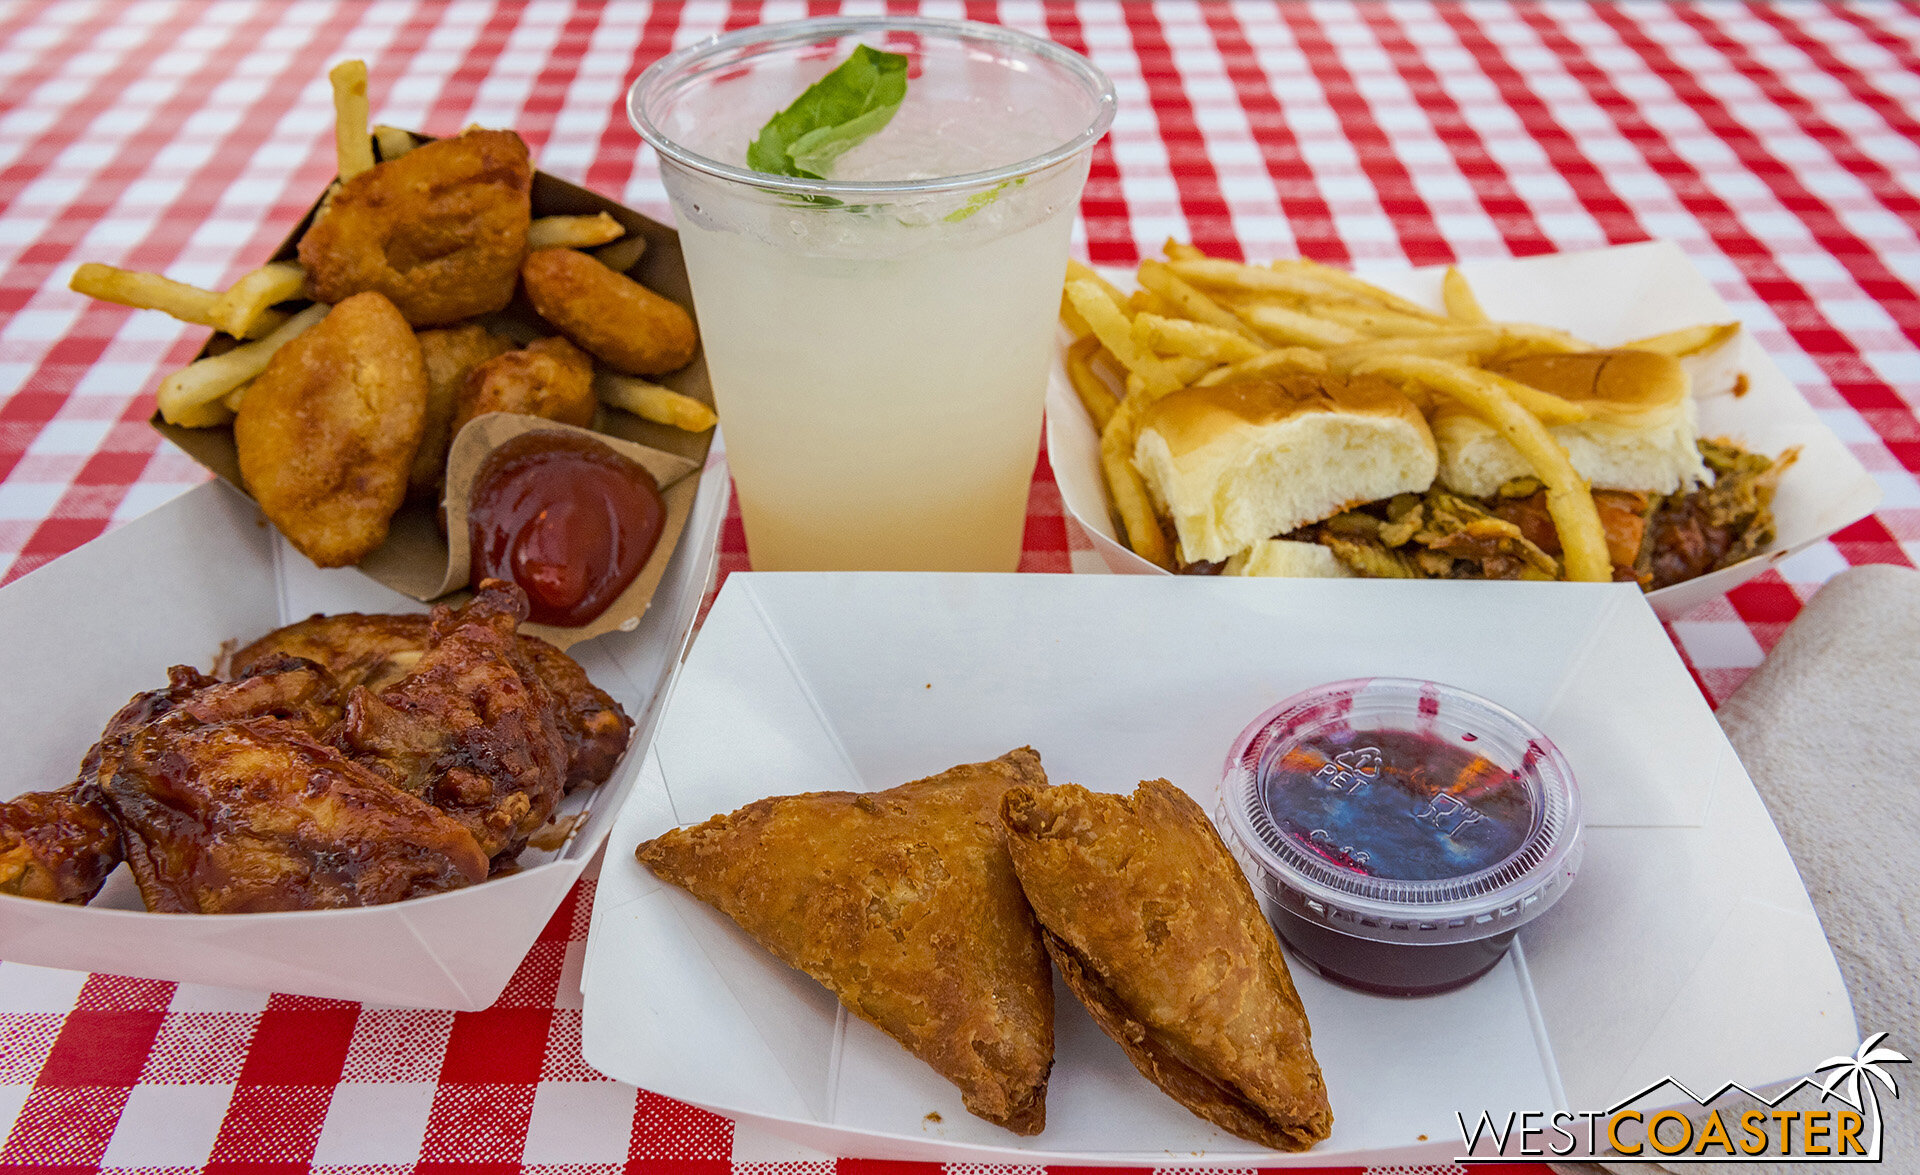  I ended up getting all five items from Sutter’s Grill, located near the front of Ghost Town (just behind the Wagon Camp)—not only because they coincided with most of the best looking dishes to me, but because I didn’t want to wait in more than one l